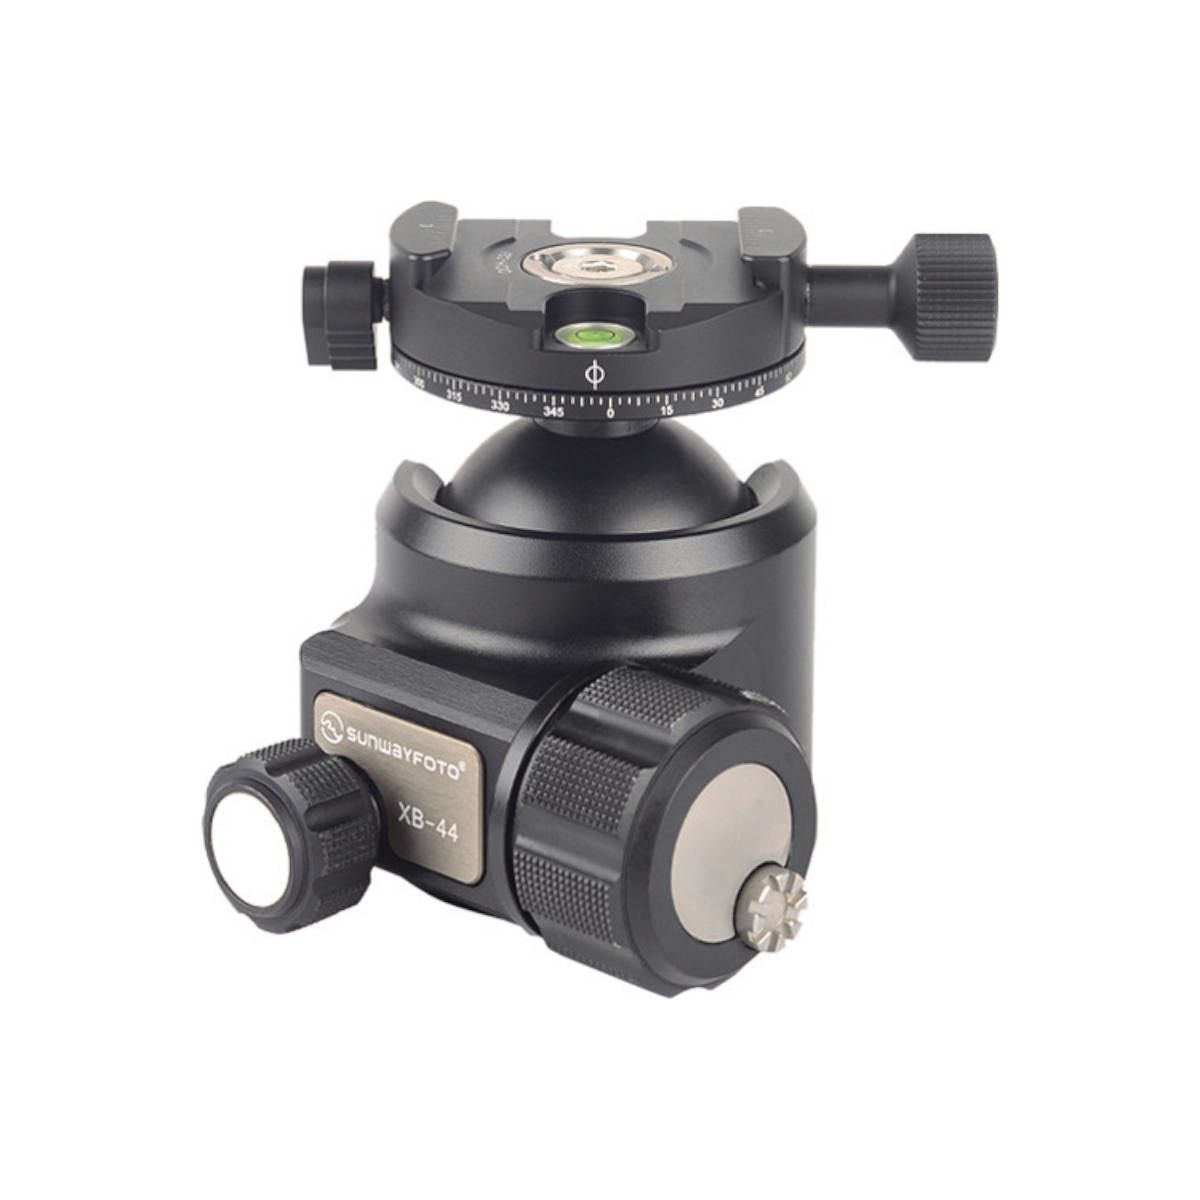 Sunwayfoto XB 44DDHX Superior Low Profile Ball Head With Panning Clamp